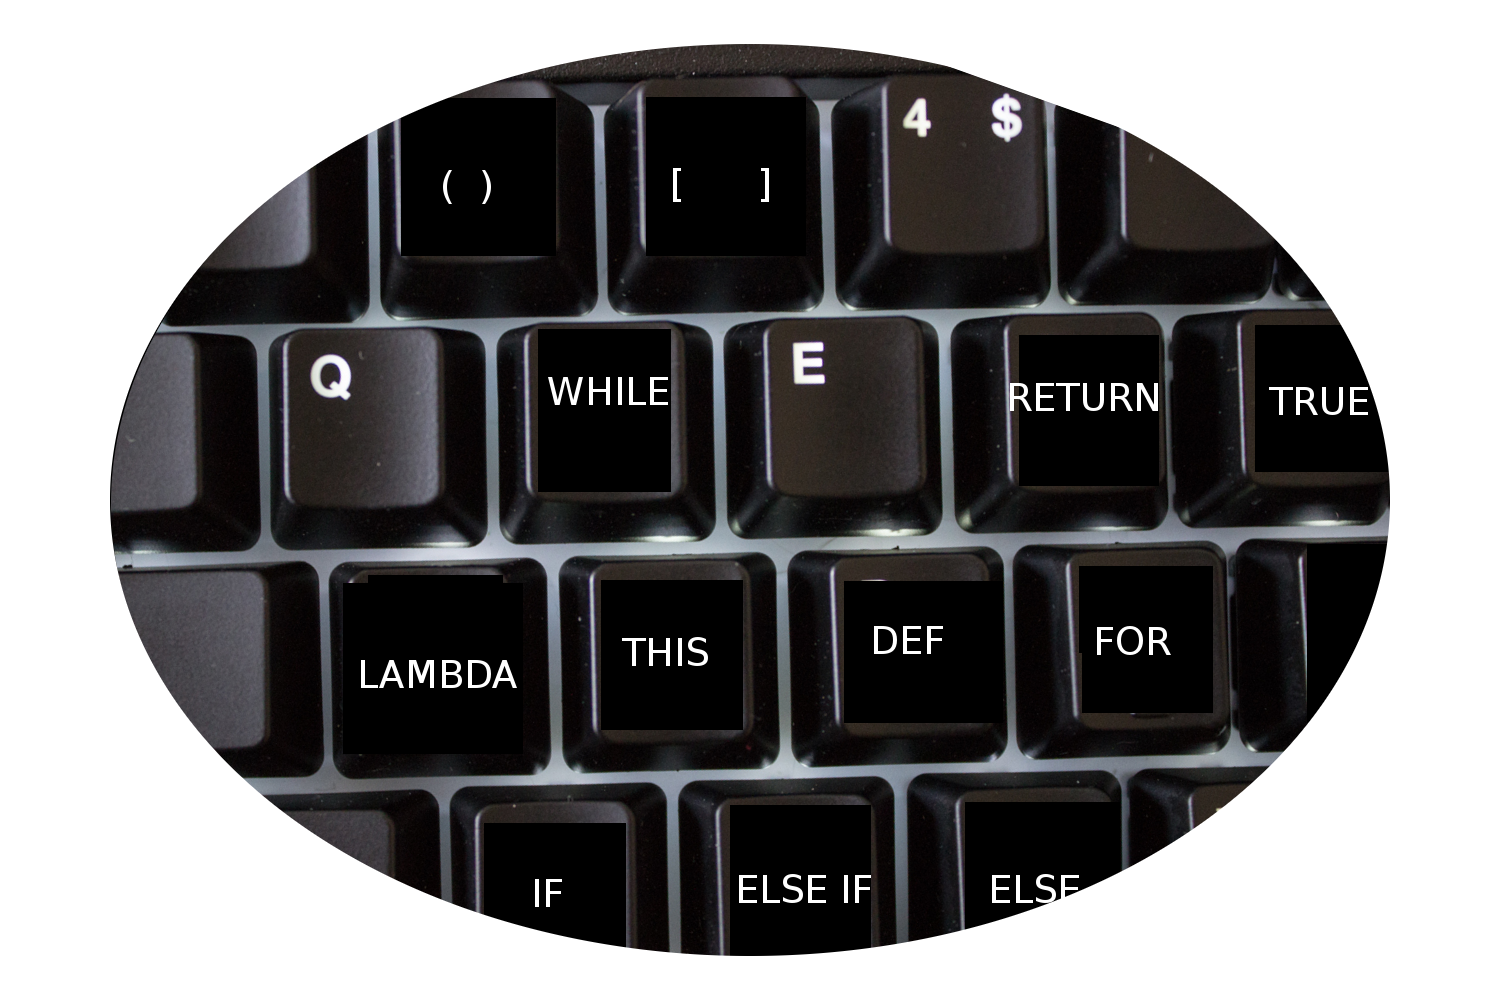 doc/img/emacs-buttons.png